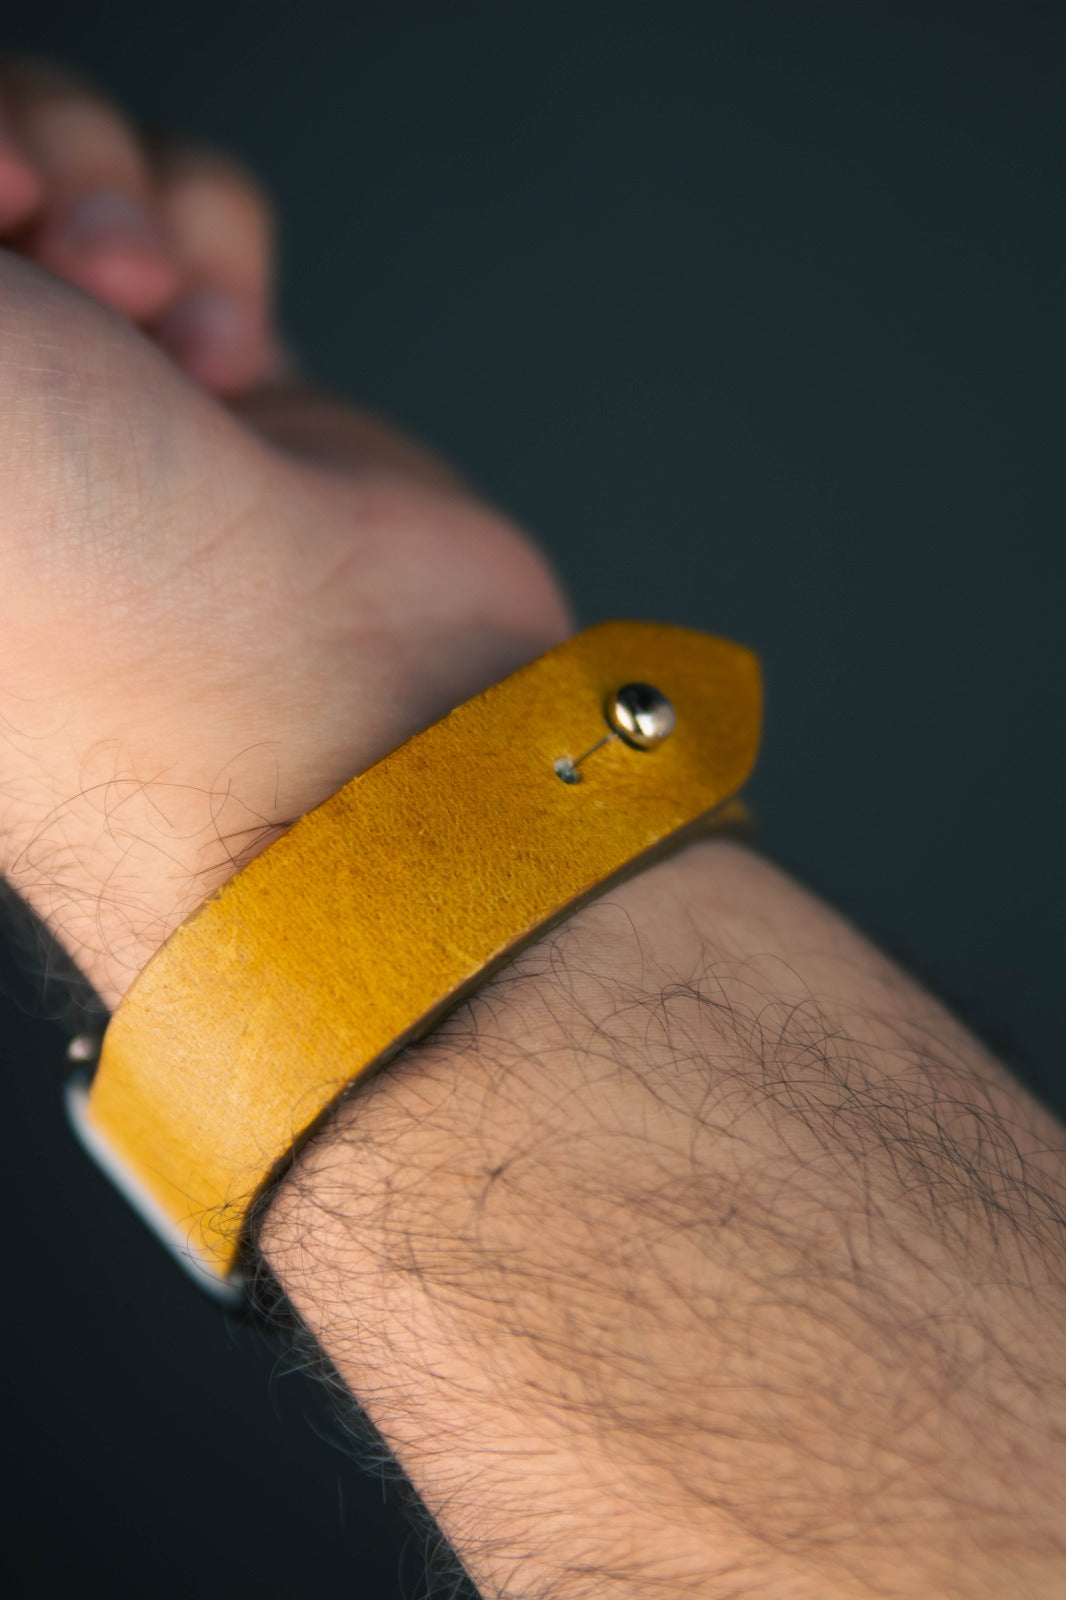 Mustard Yellow Apple Watch Strap - Pure Leather Strap